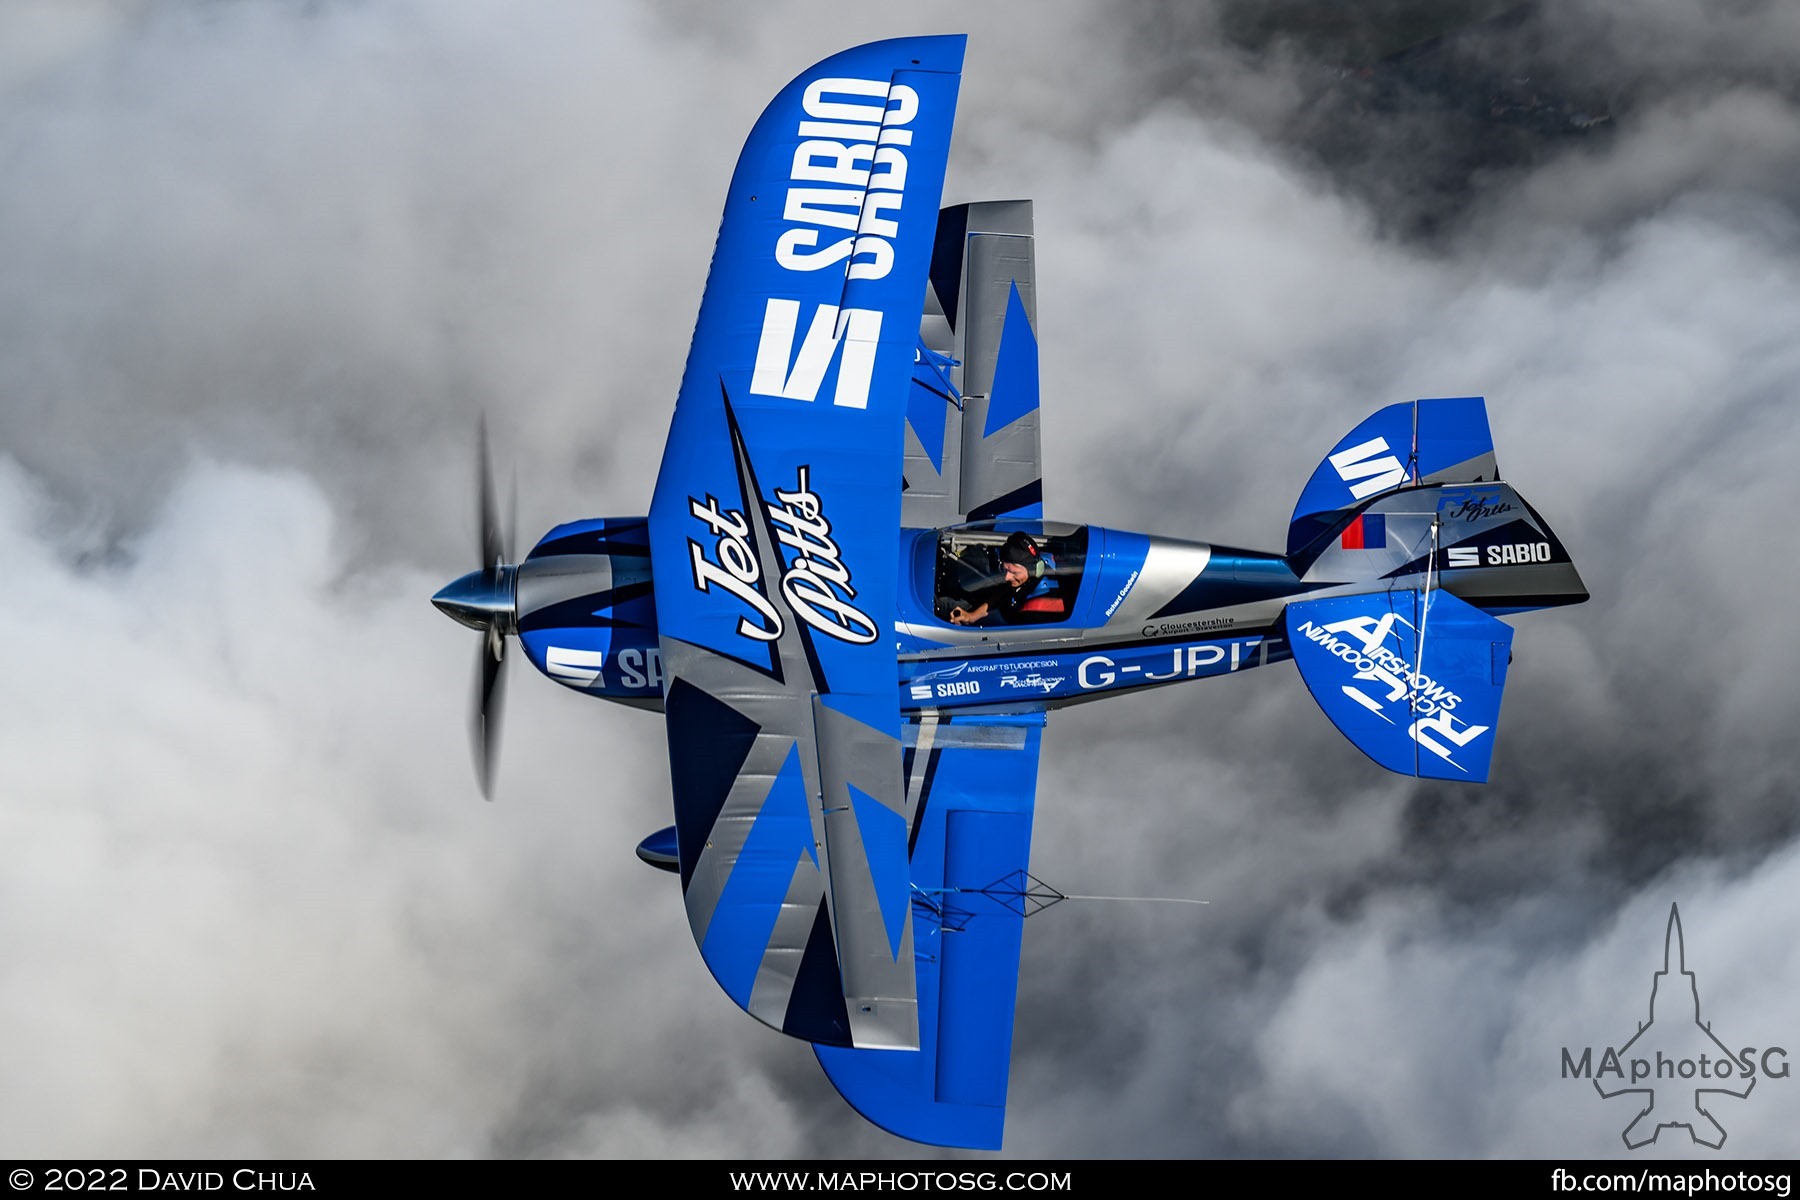 Rich Goodwin Pitts muscle biplane